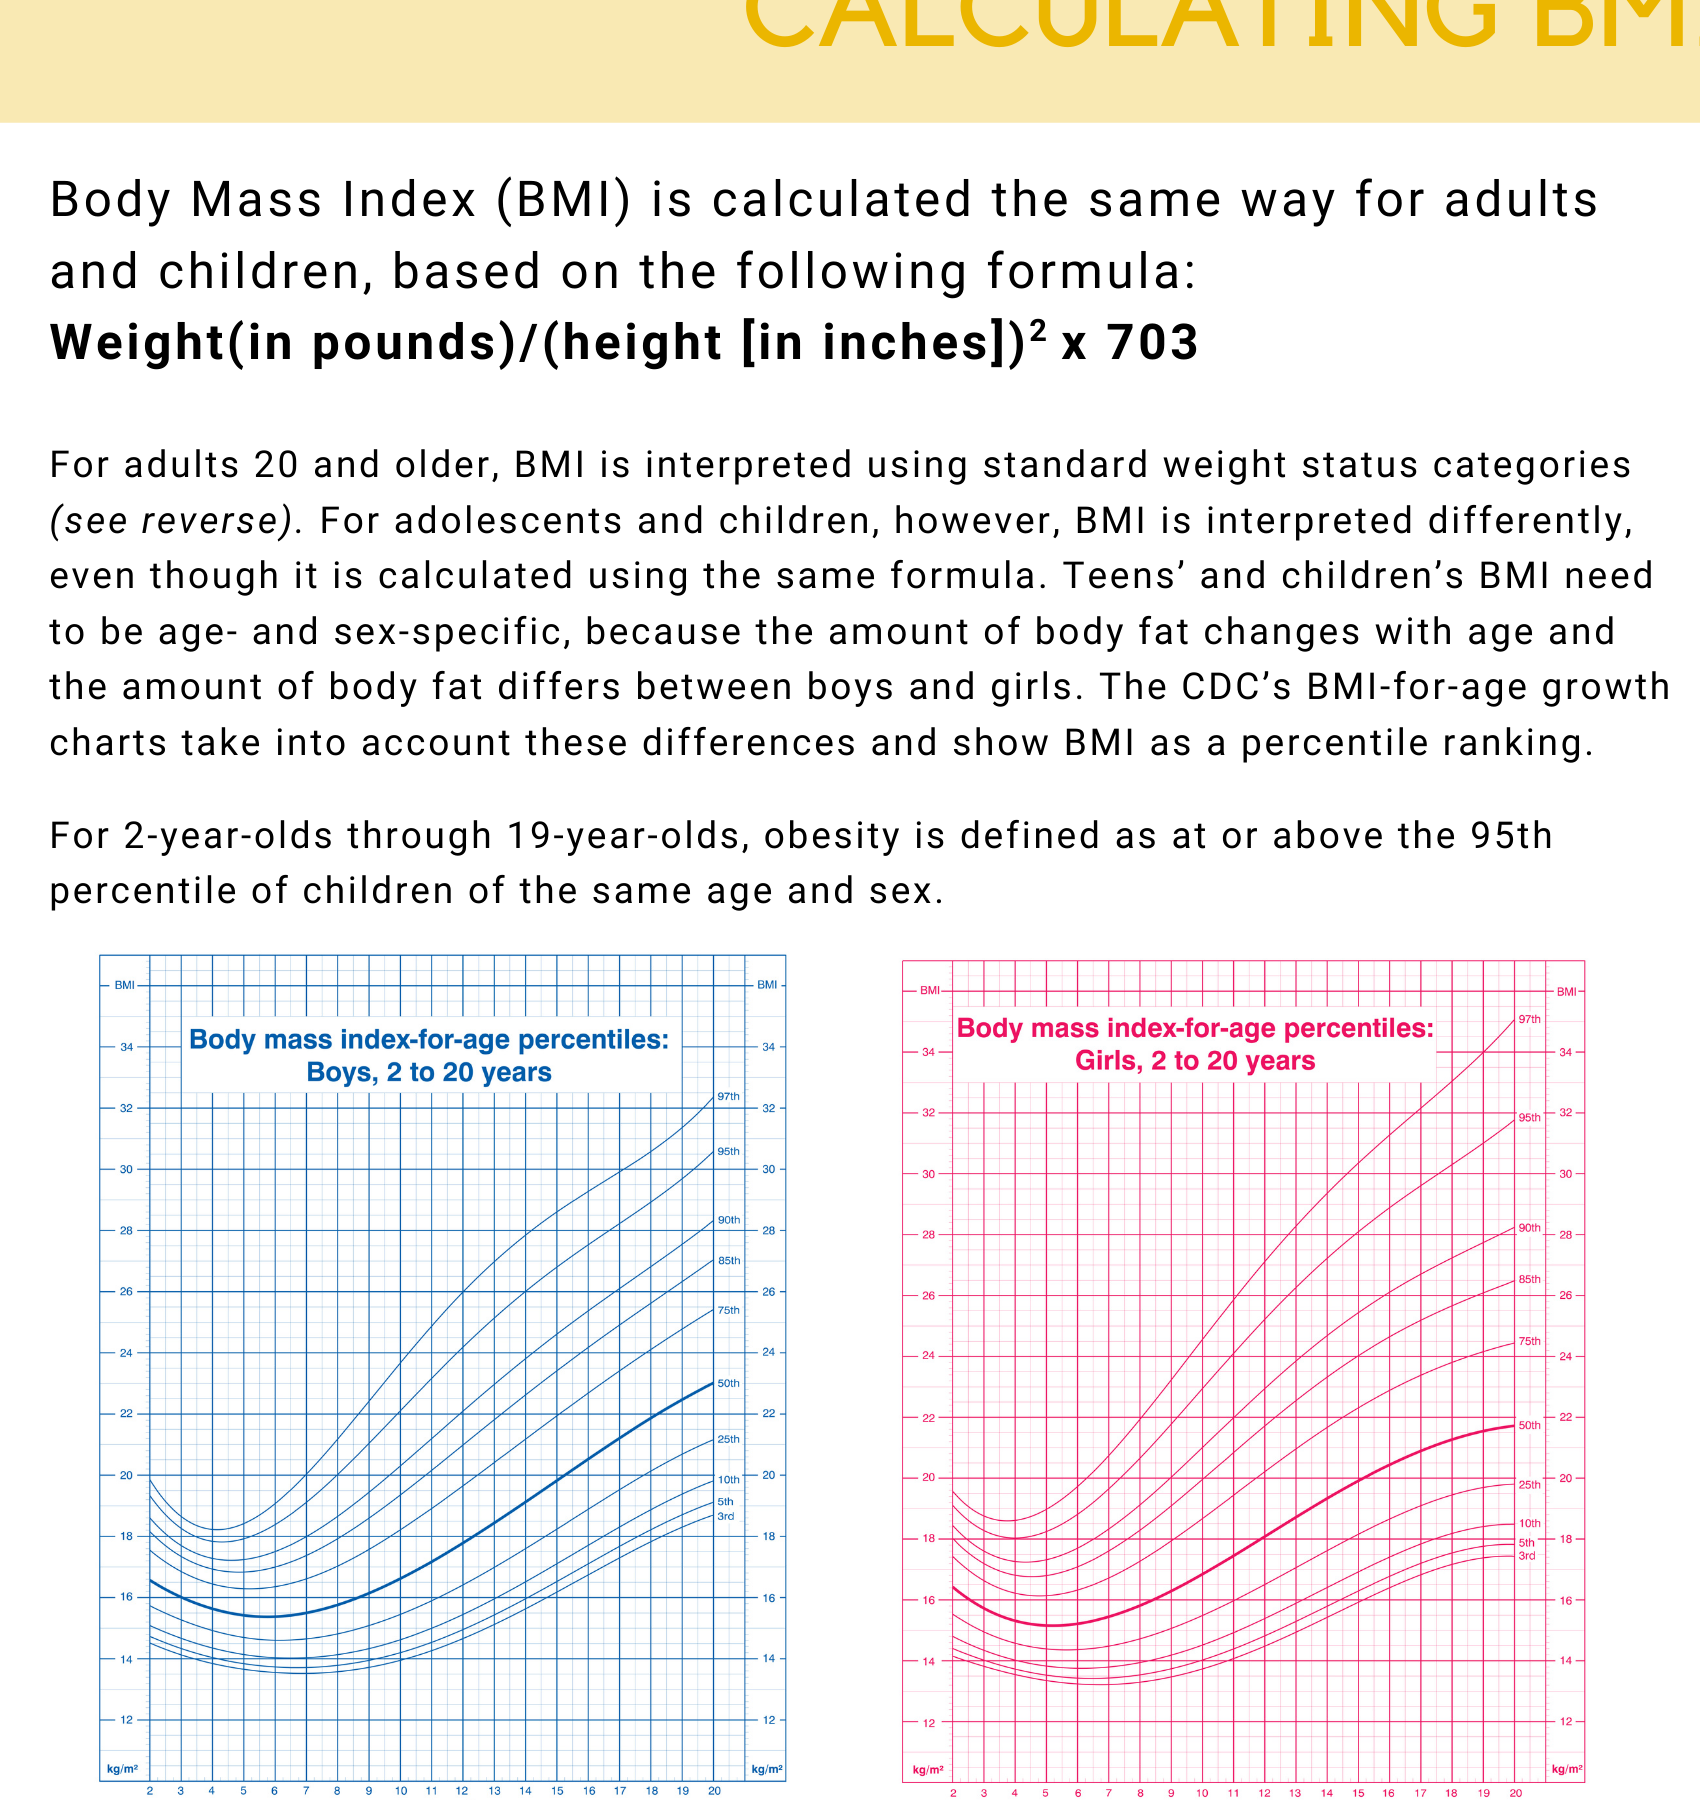 What is overweight in a 14-year-old child?